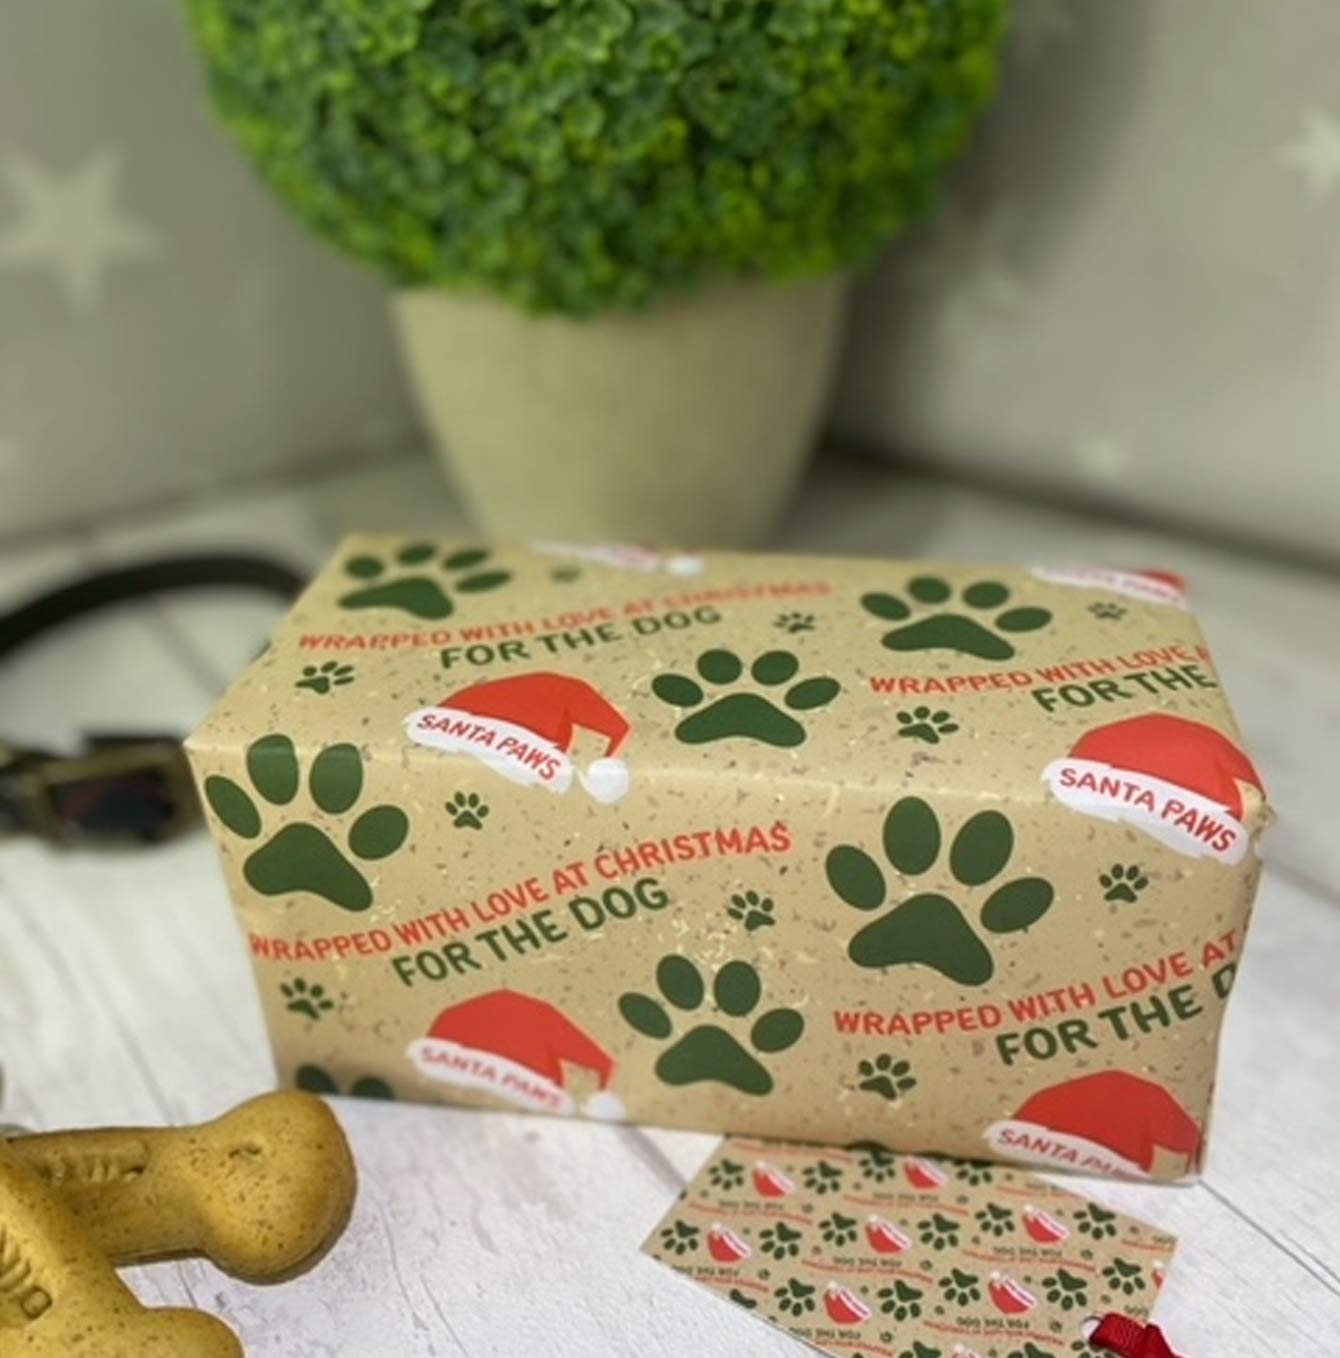 For the dog christmas wrapping paper